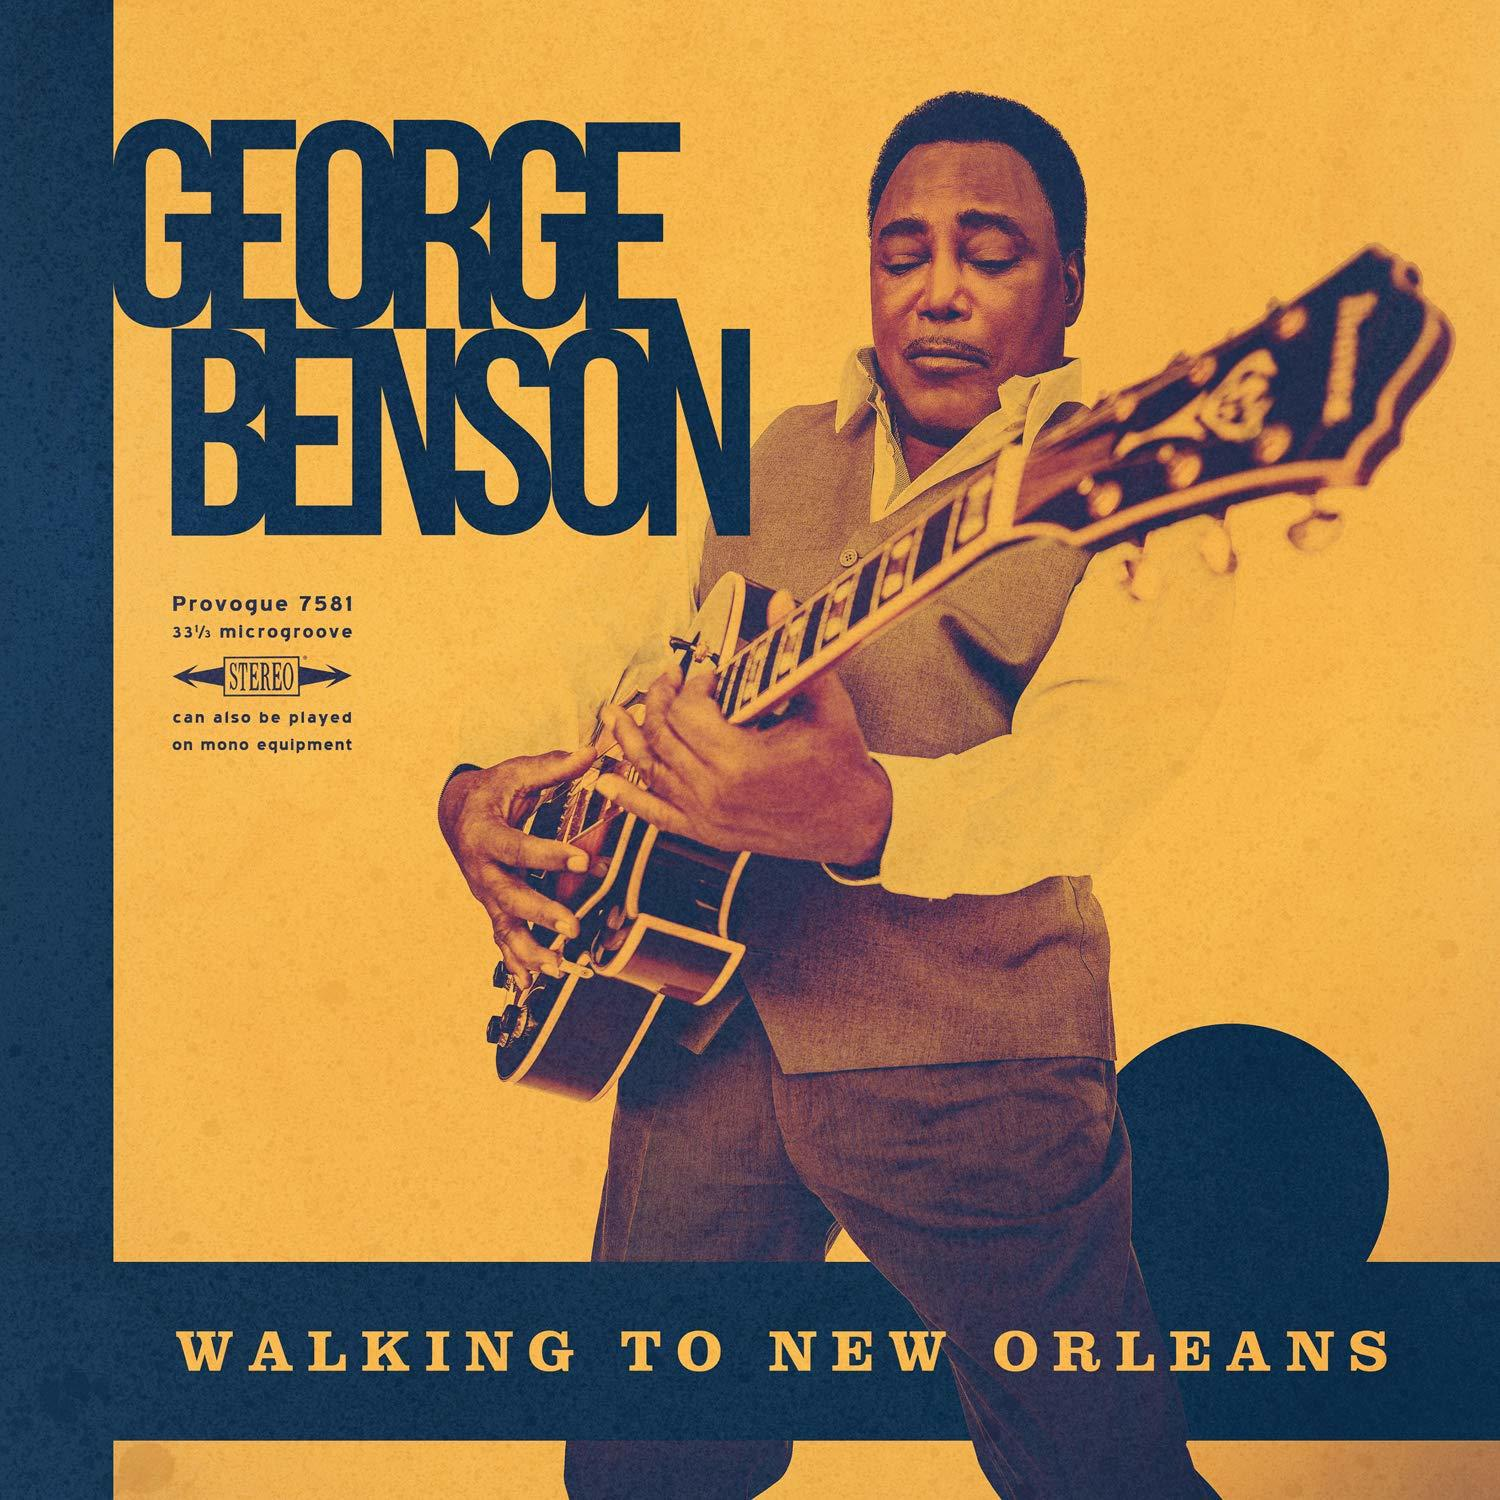 George Benson To Orleans-Remembering...(CD) - New Walking - (CD)